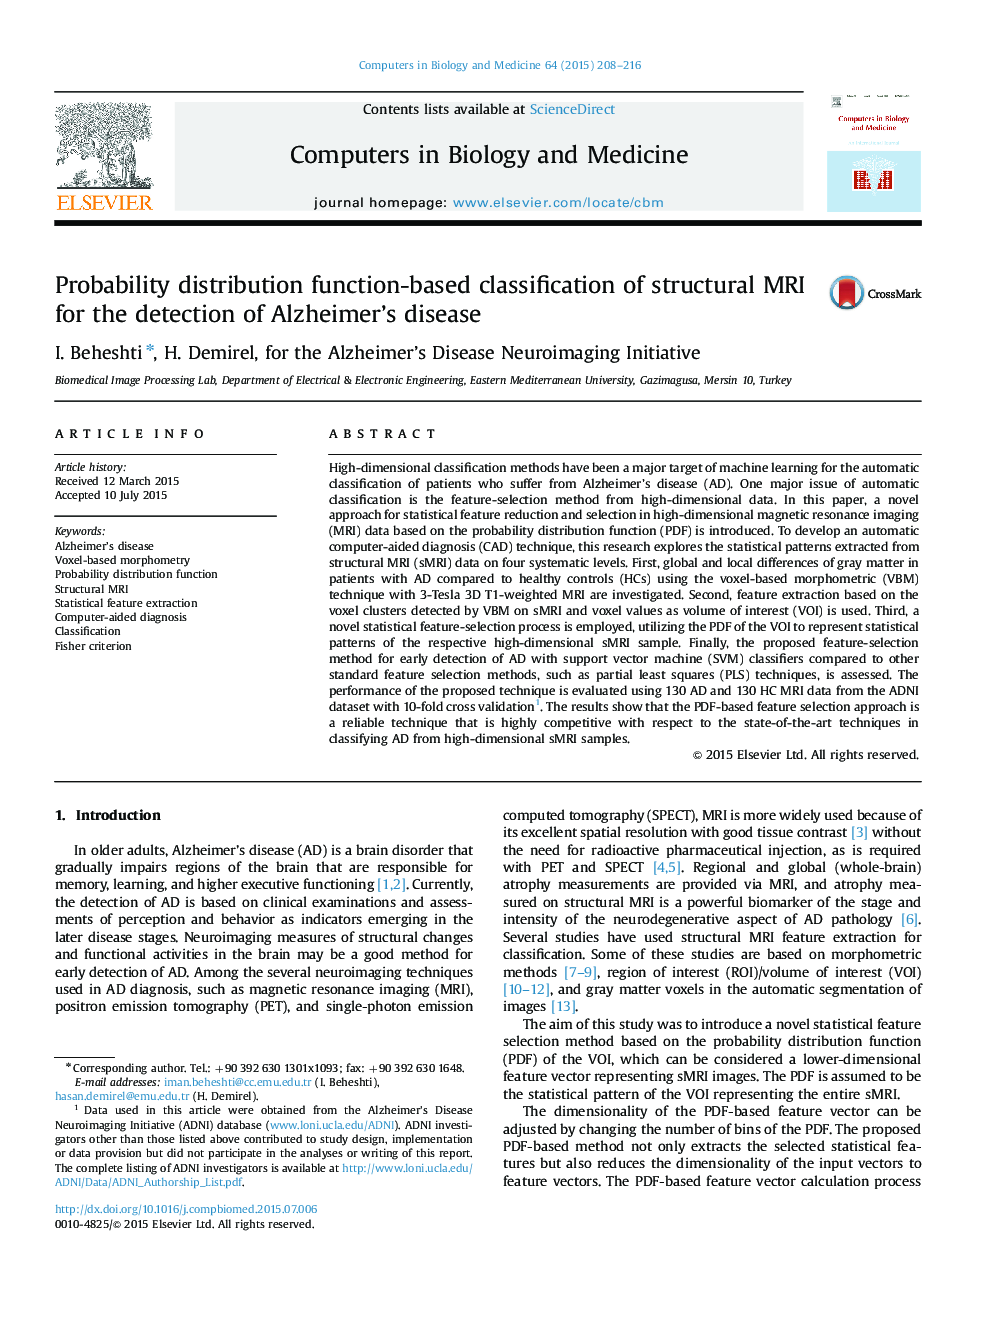 Probability distribution function-based classification of structural MRI for the detection of Alzheimer’s disease